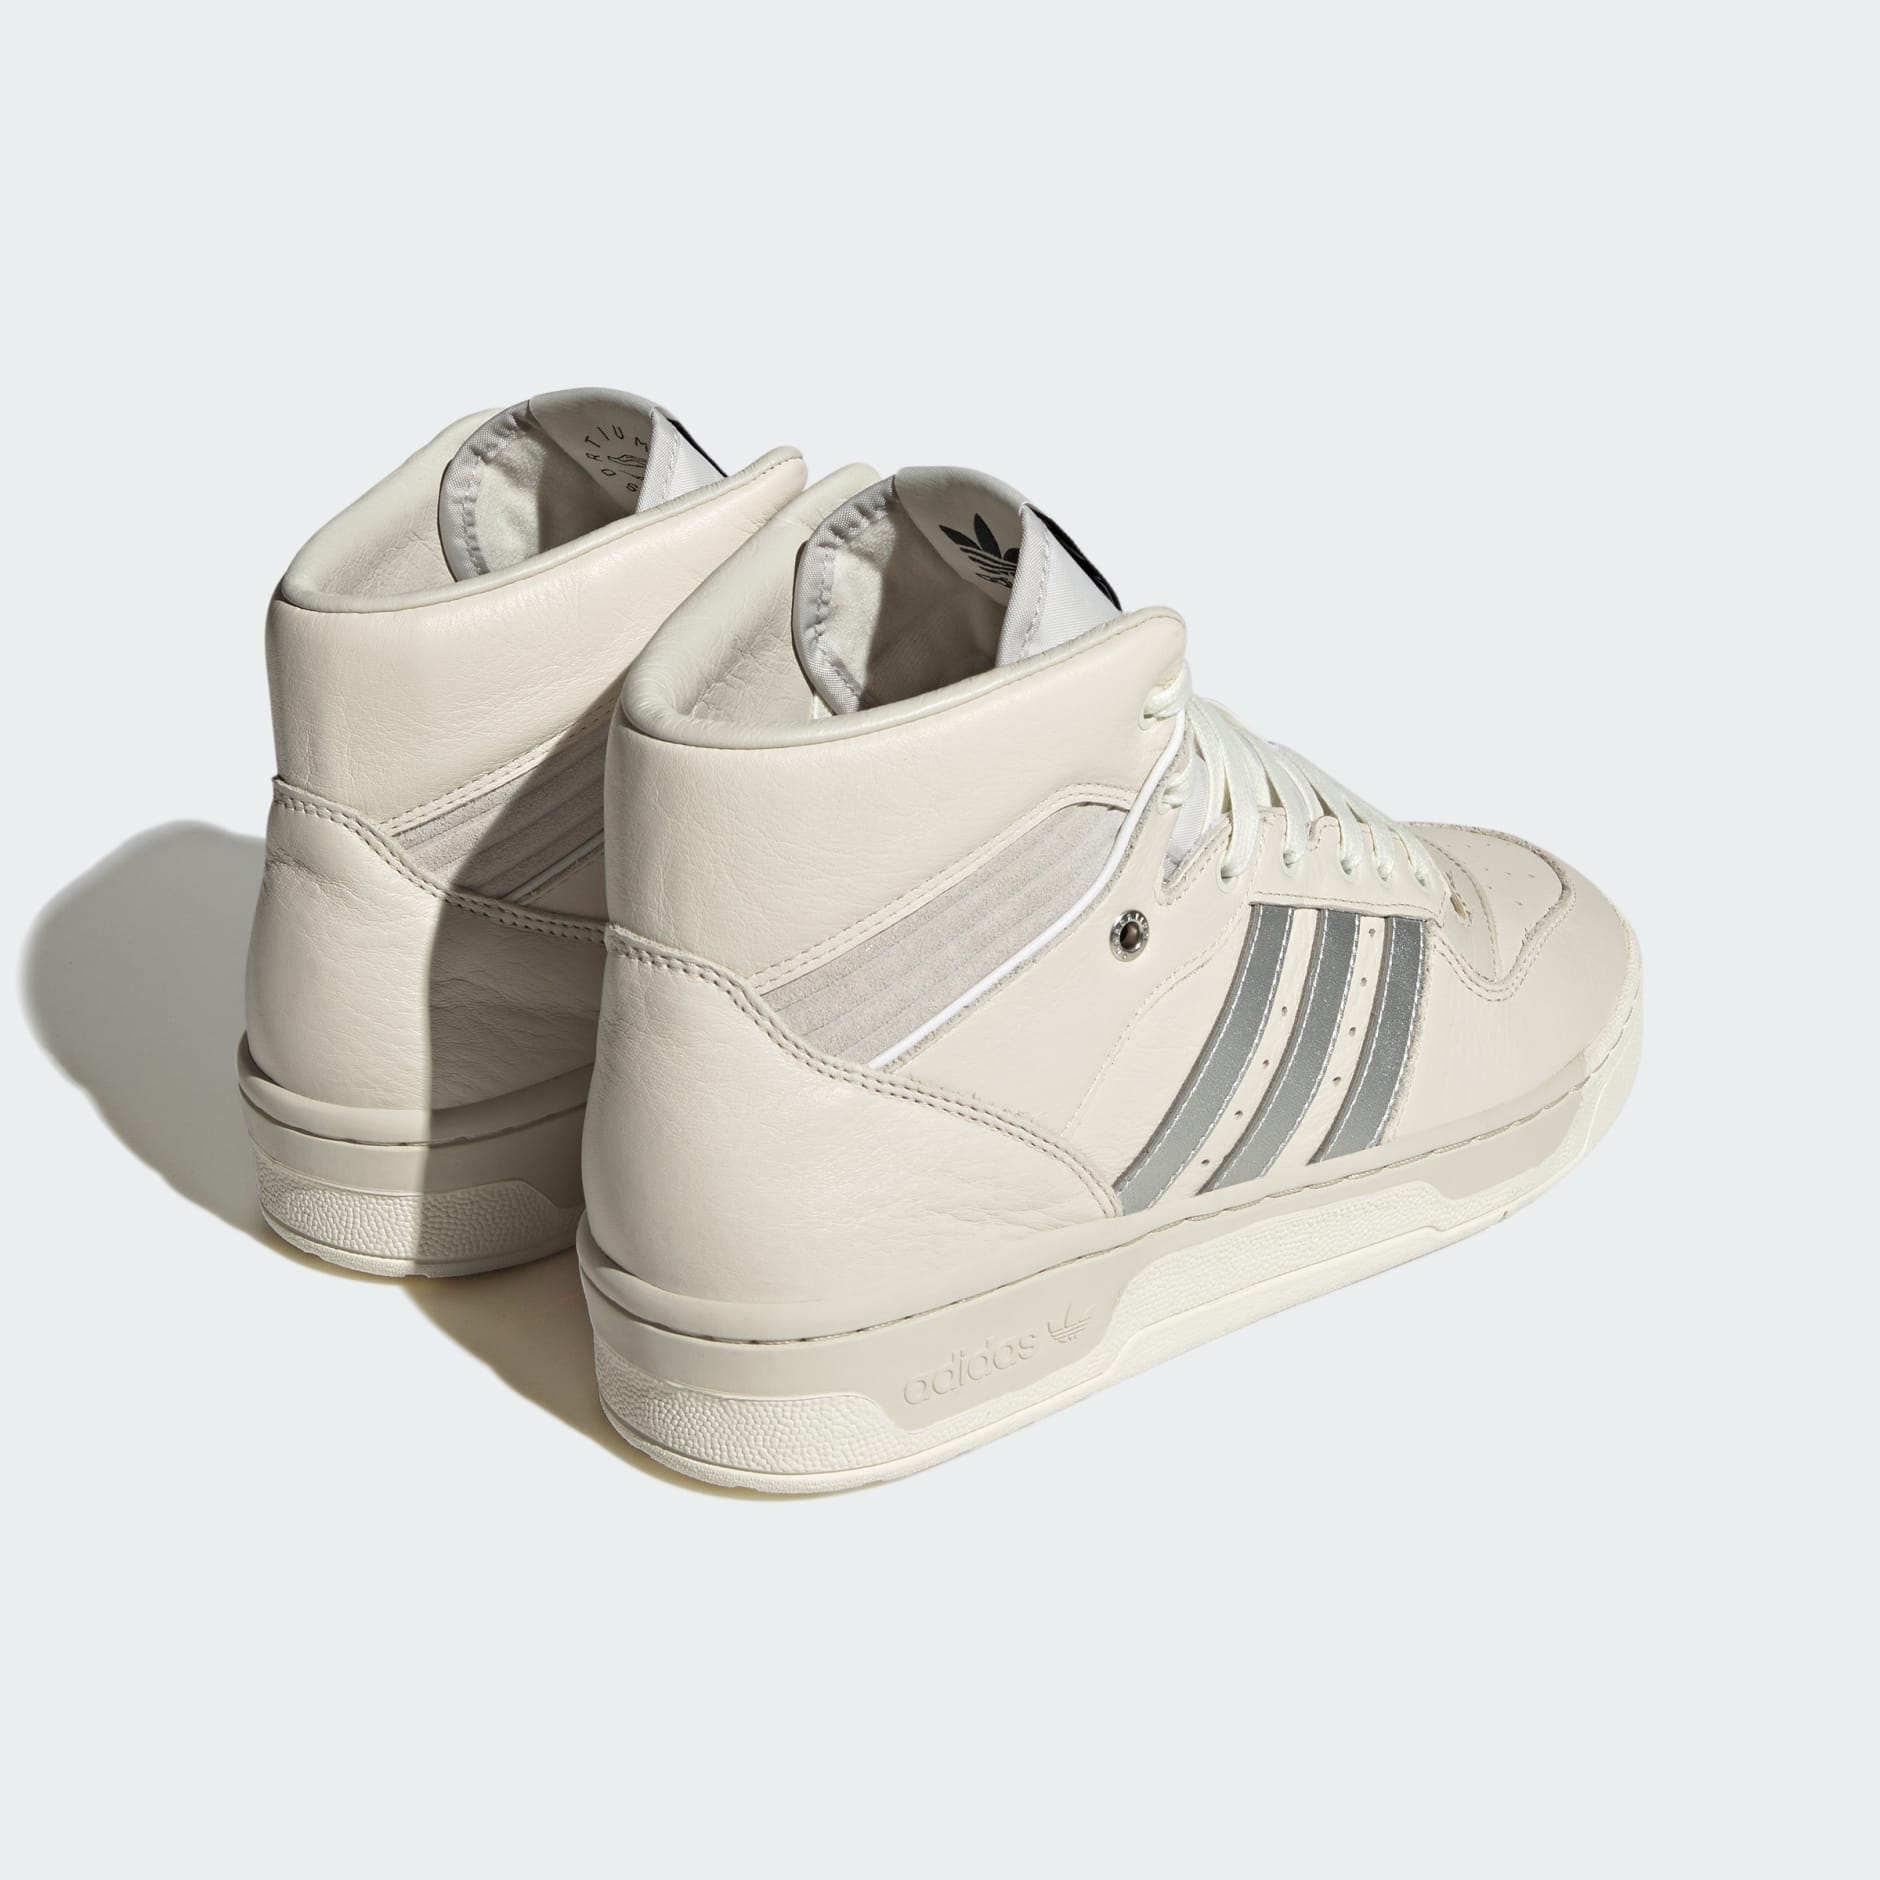 Shoes - Rivalry High Consortium Shoes - White | adidas South Africa